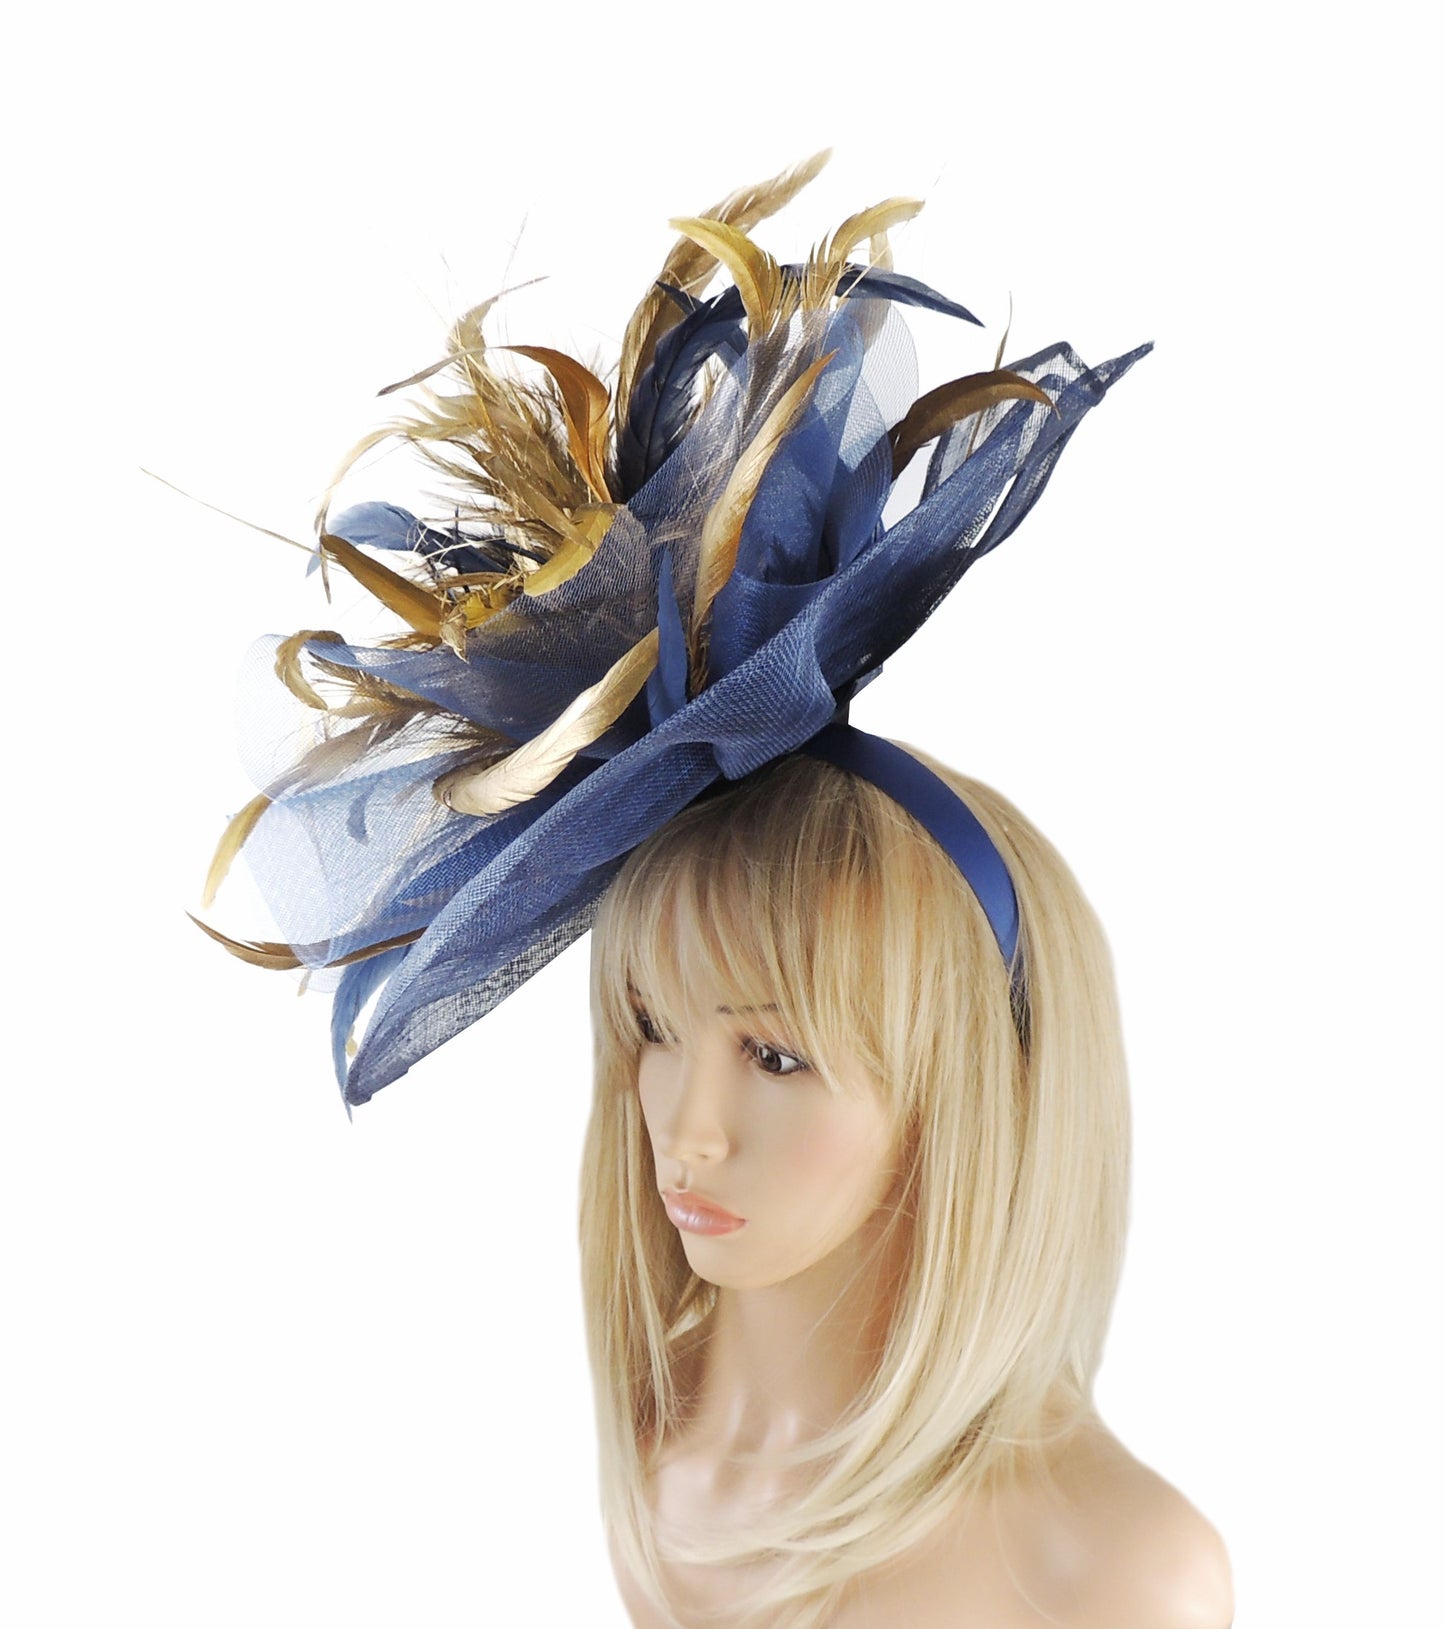 Susan Large Feather Royal Ascot Fascinator Hat - Hats By Cressida